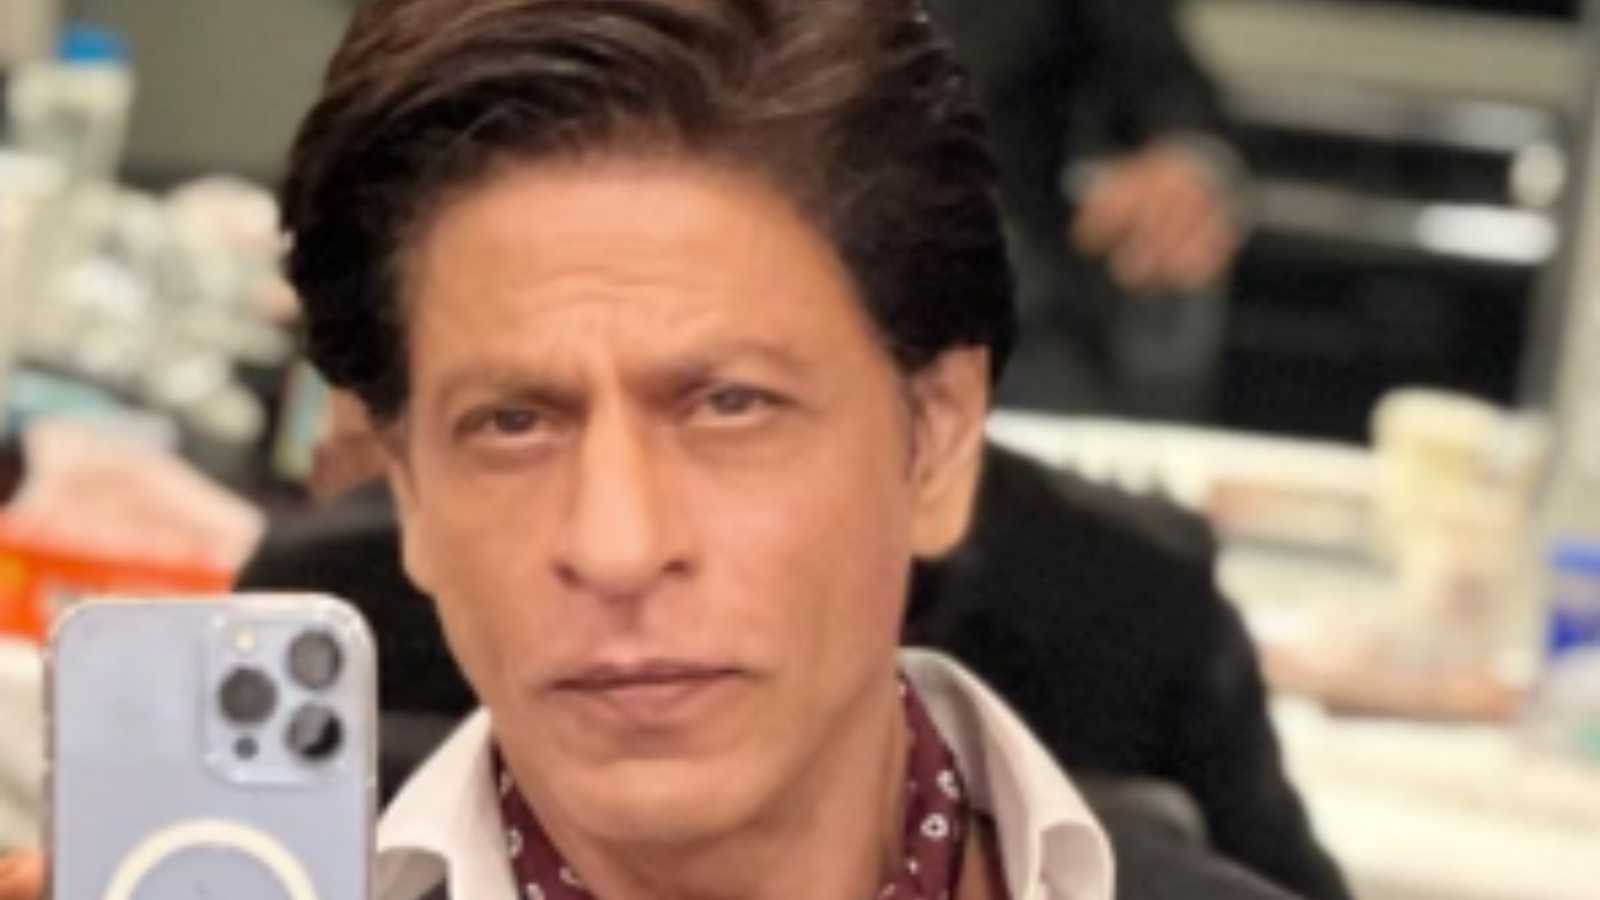 Shah Rukh Khan sets the dance floor on fire in THIS throwback video to Na Ja, fan says 'love to see him so happy'